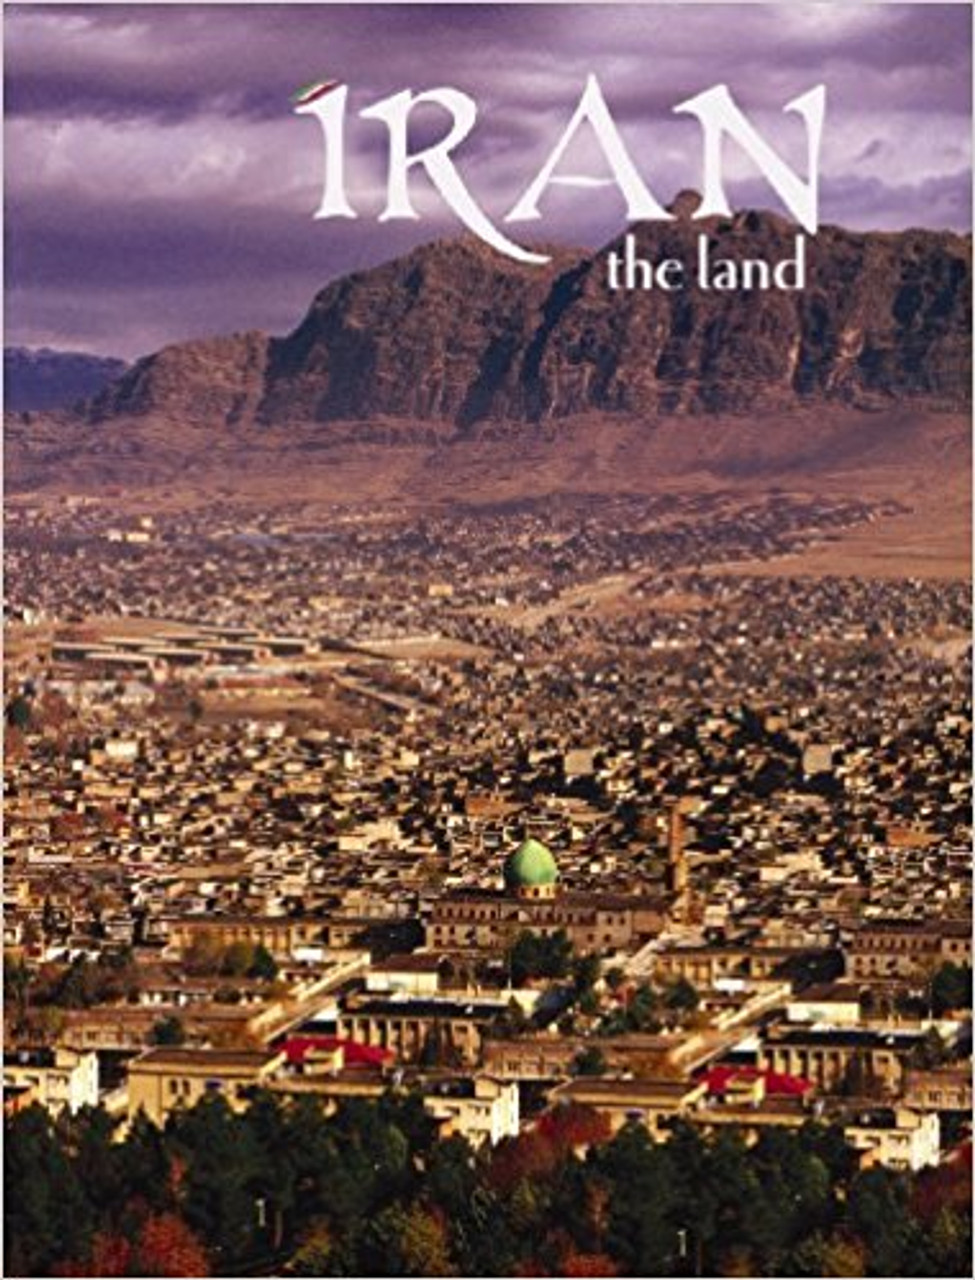 Iran - the land (revised, ed. 2) by April Fast